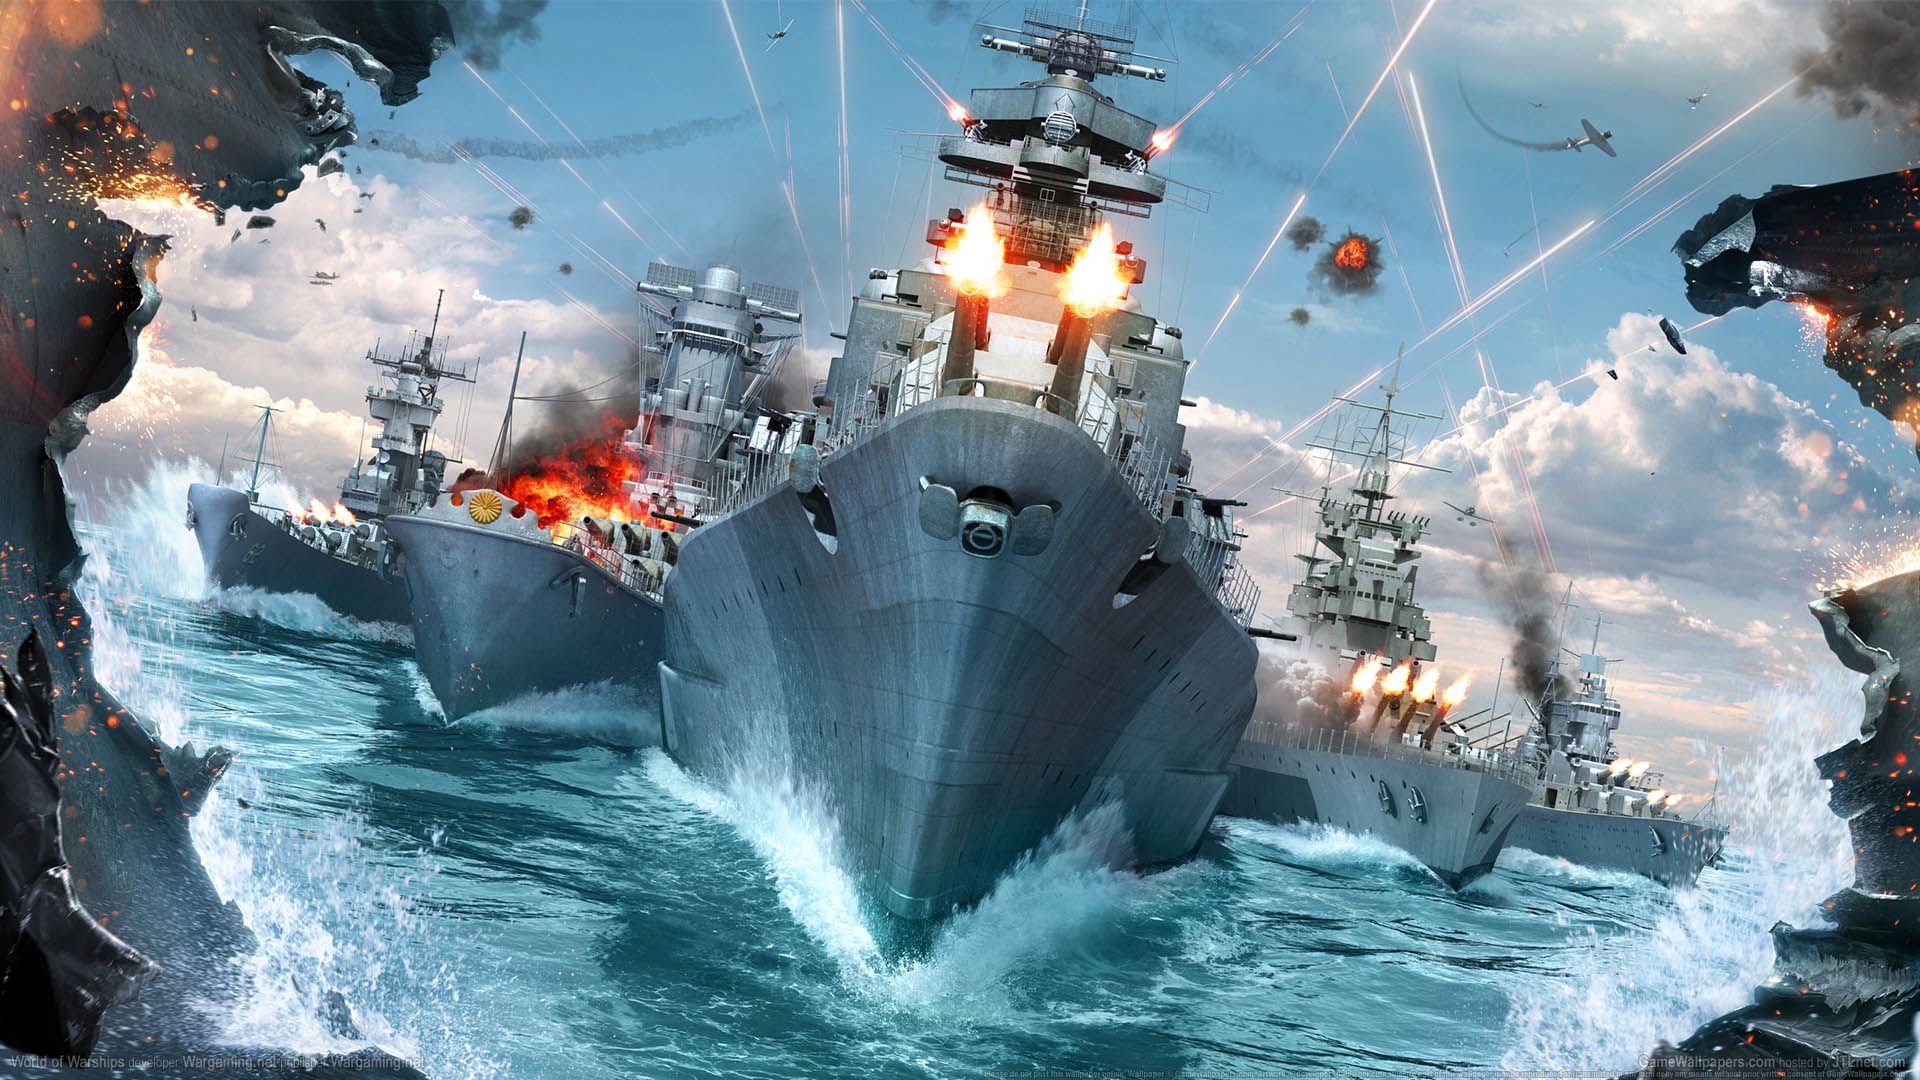 World of Warships: More Than Just a Game - MMOGames.com
